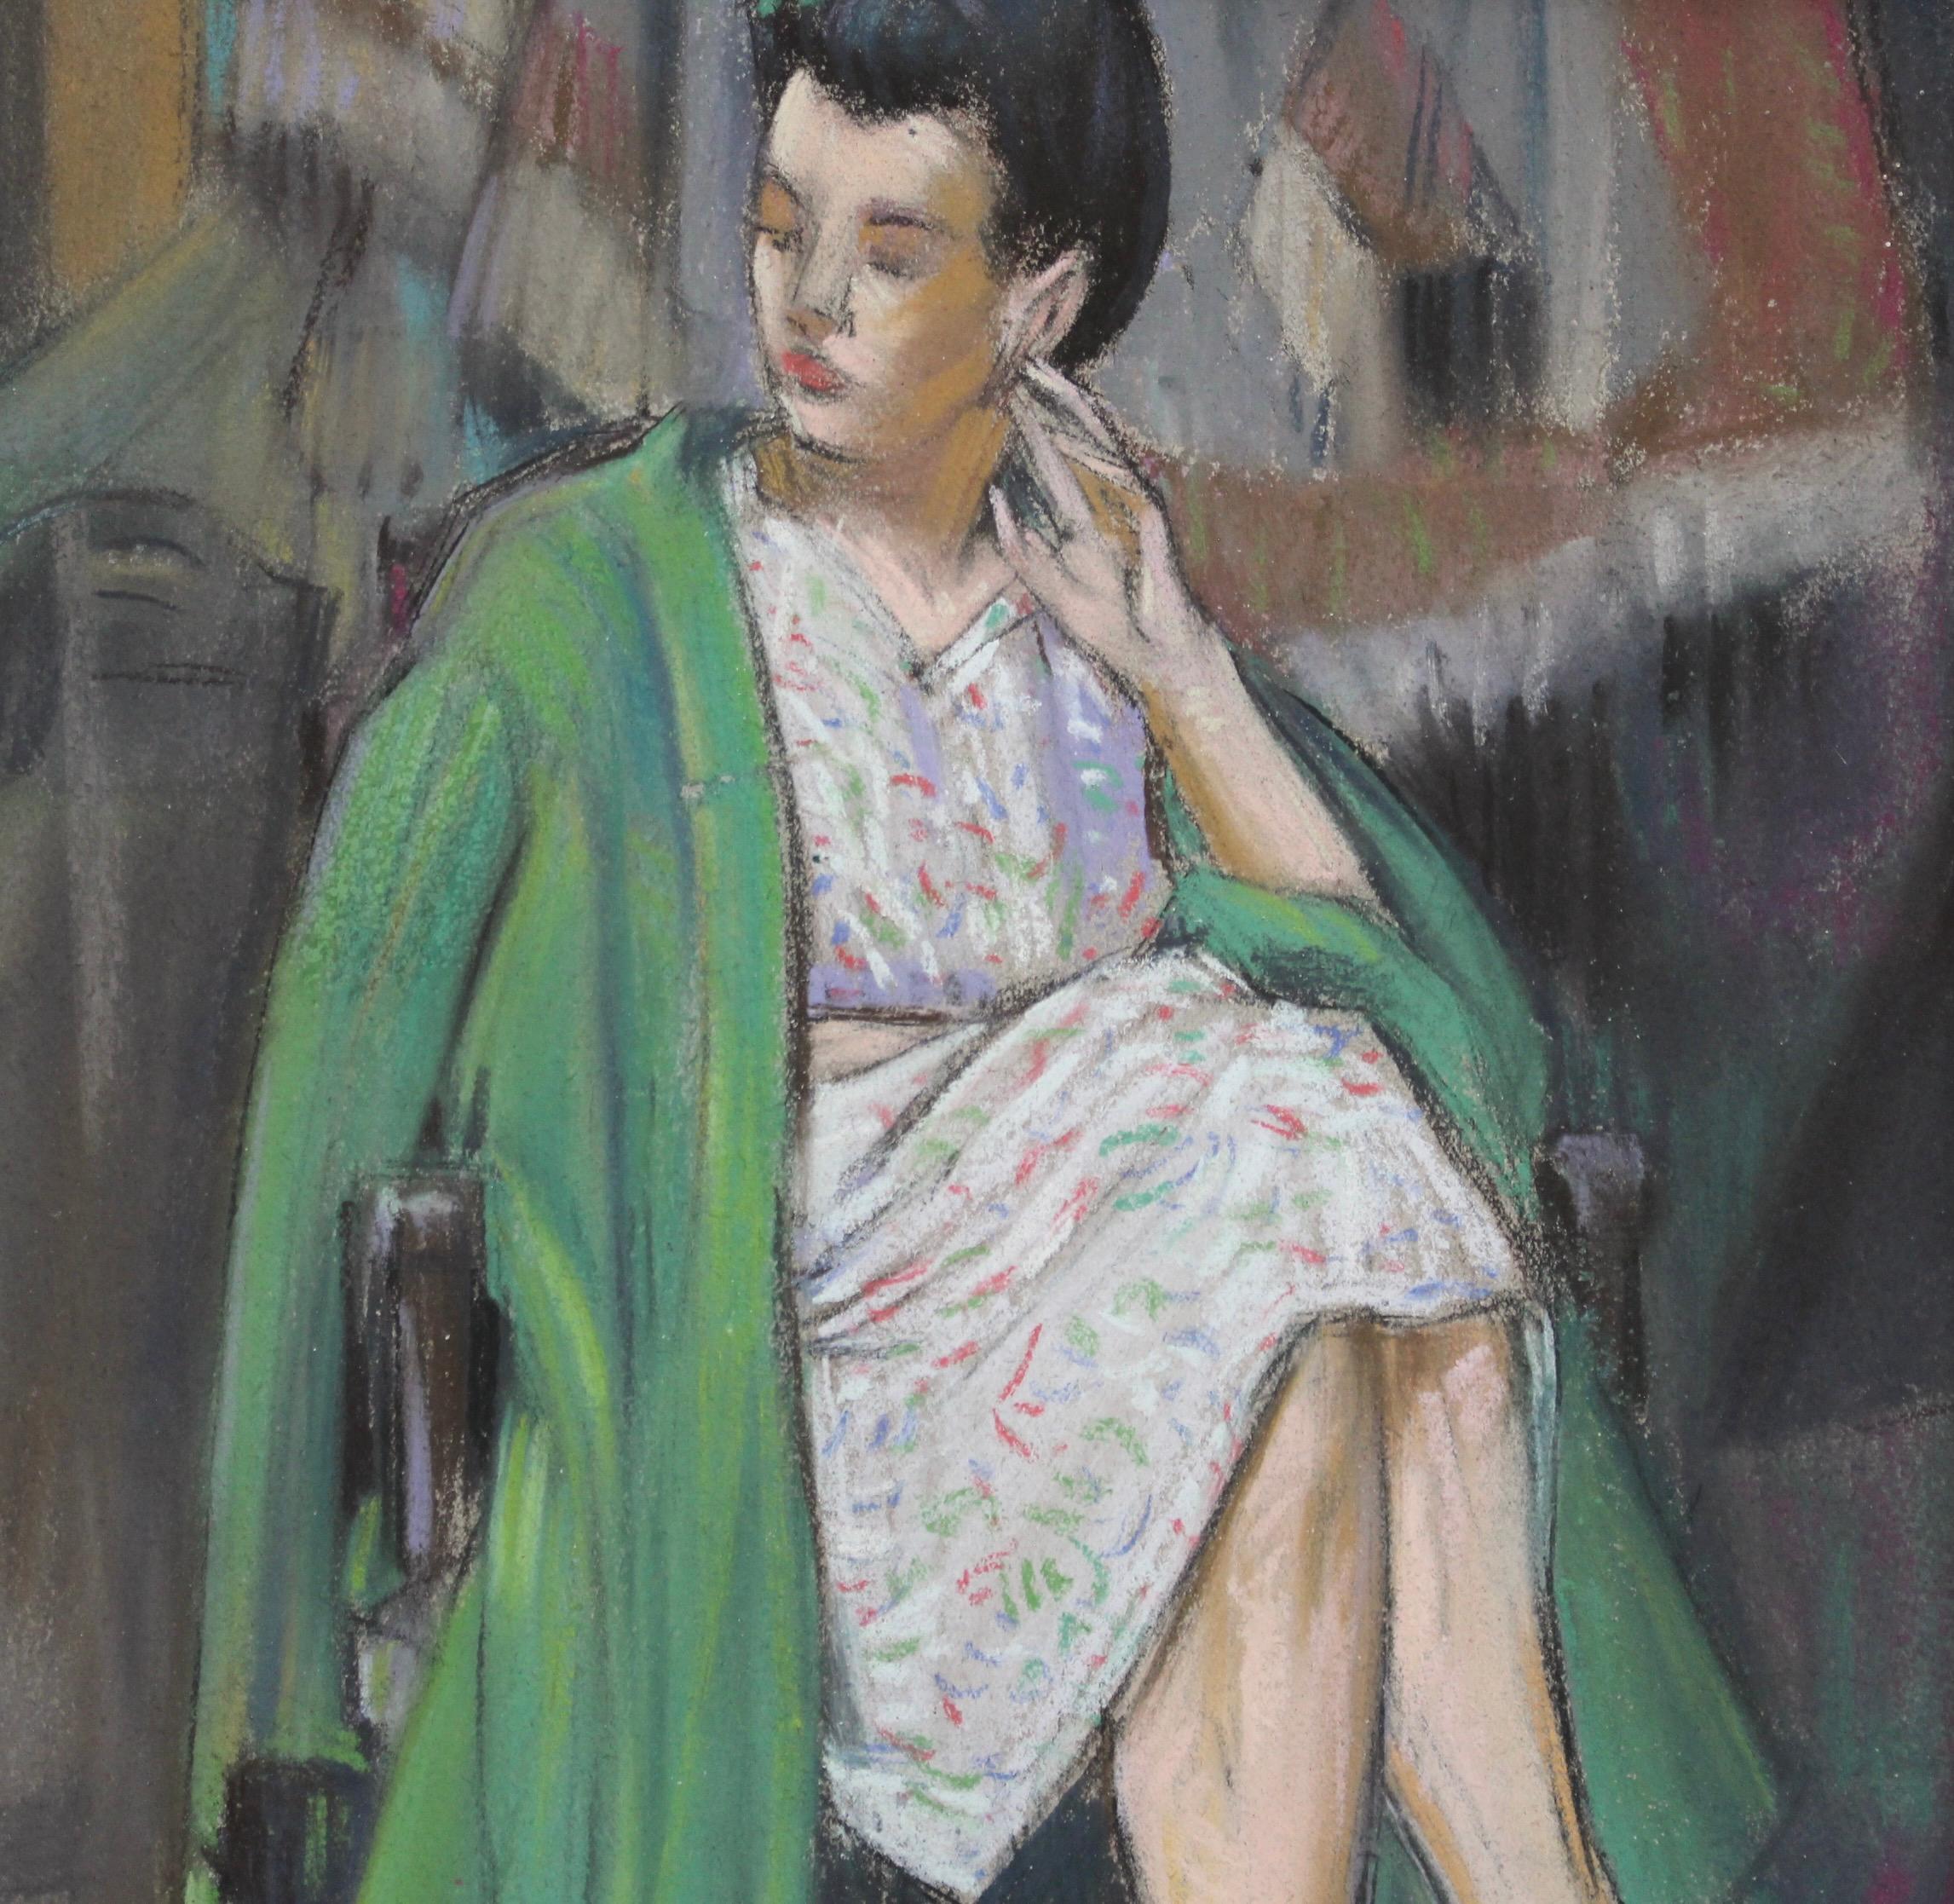 'The Green Coat' by W. Worms - Gray Portrait Painting by Unknown